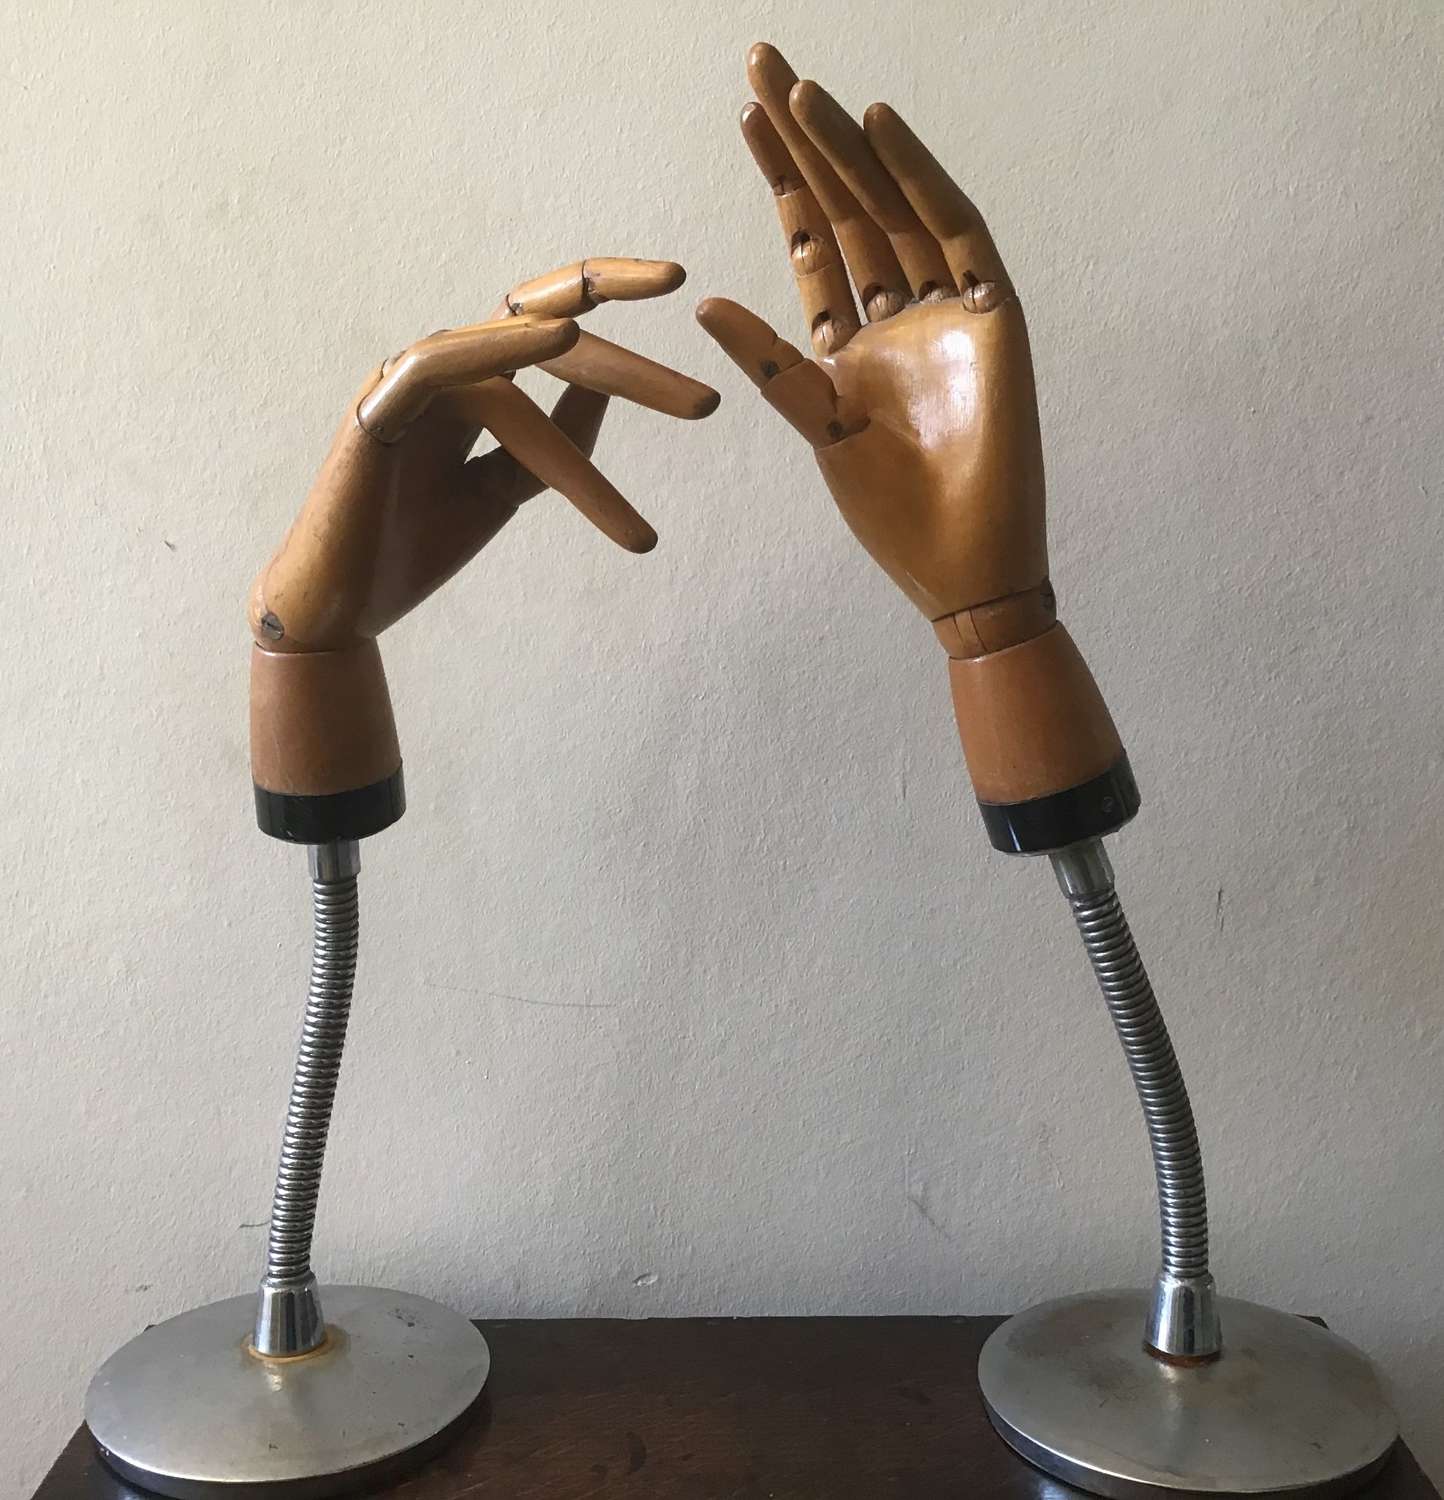 Pair of articulated artists hands or shop display